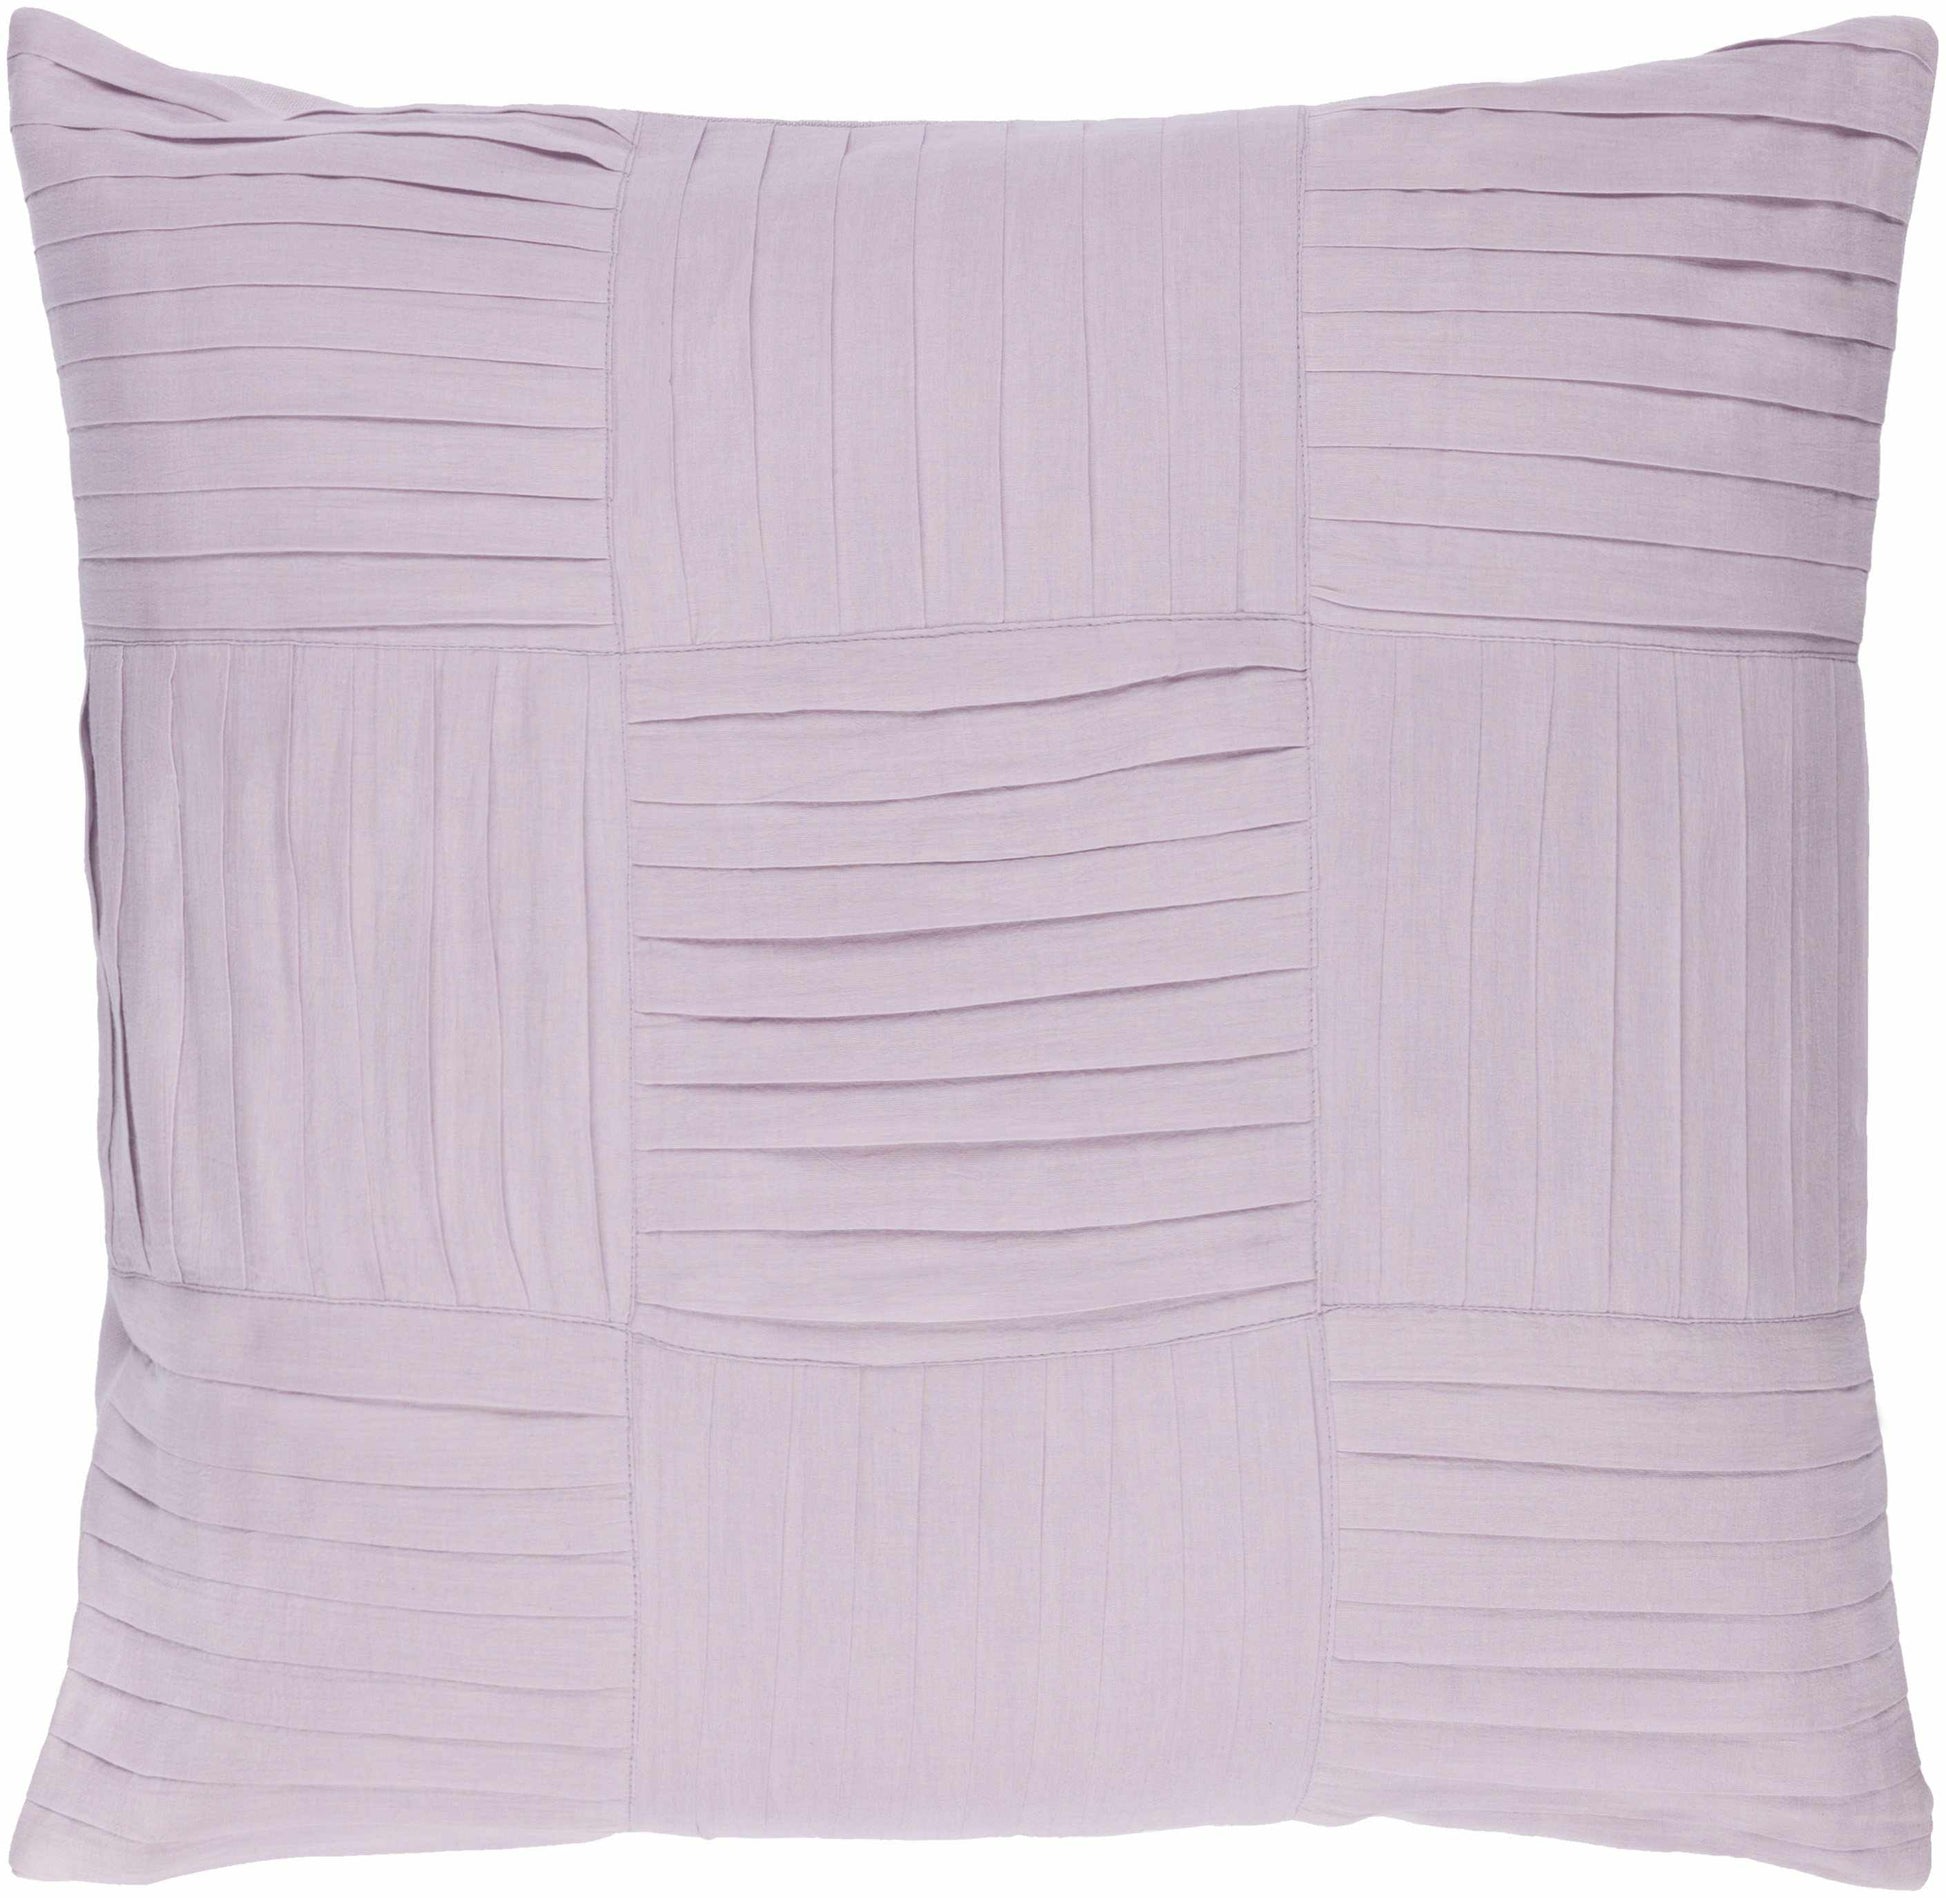 Ittre Lilac Pillow Cover